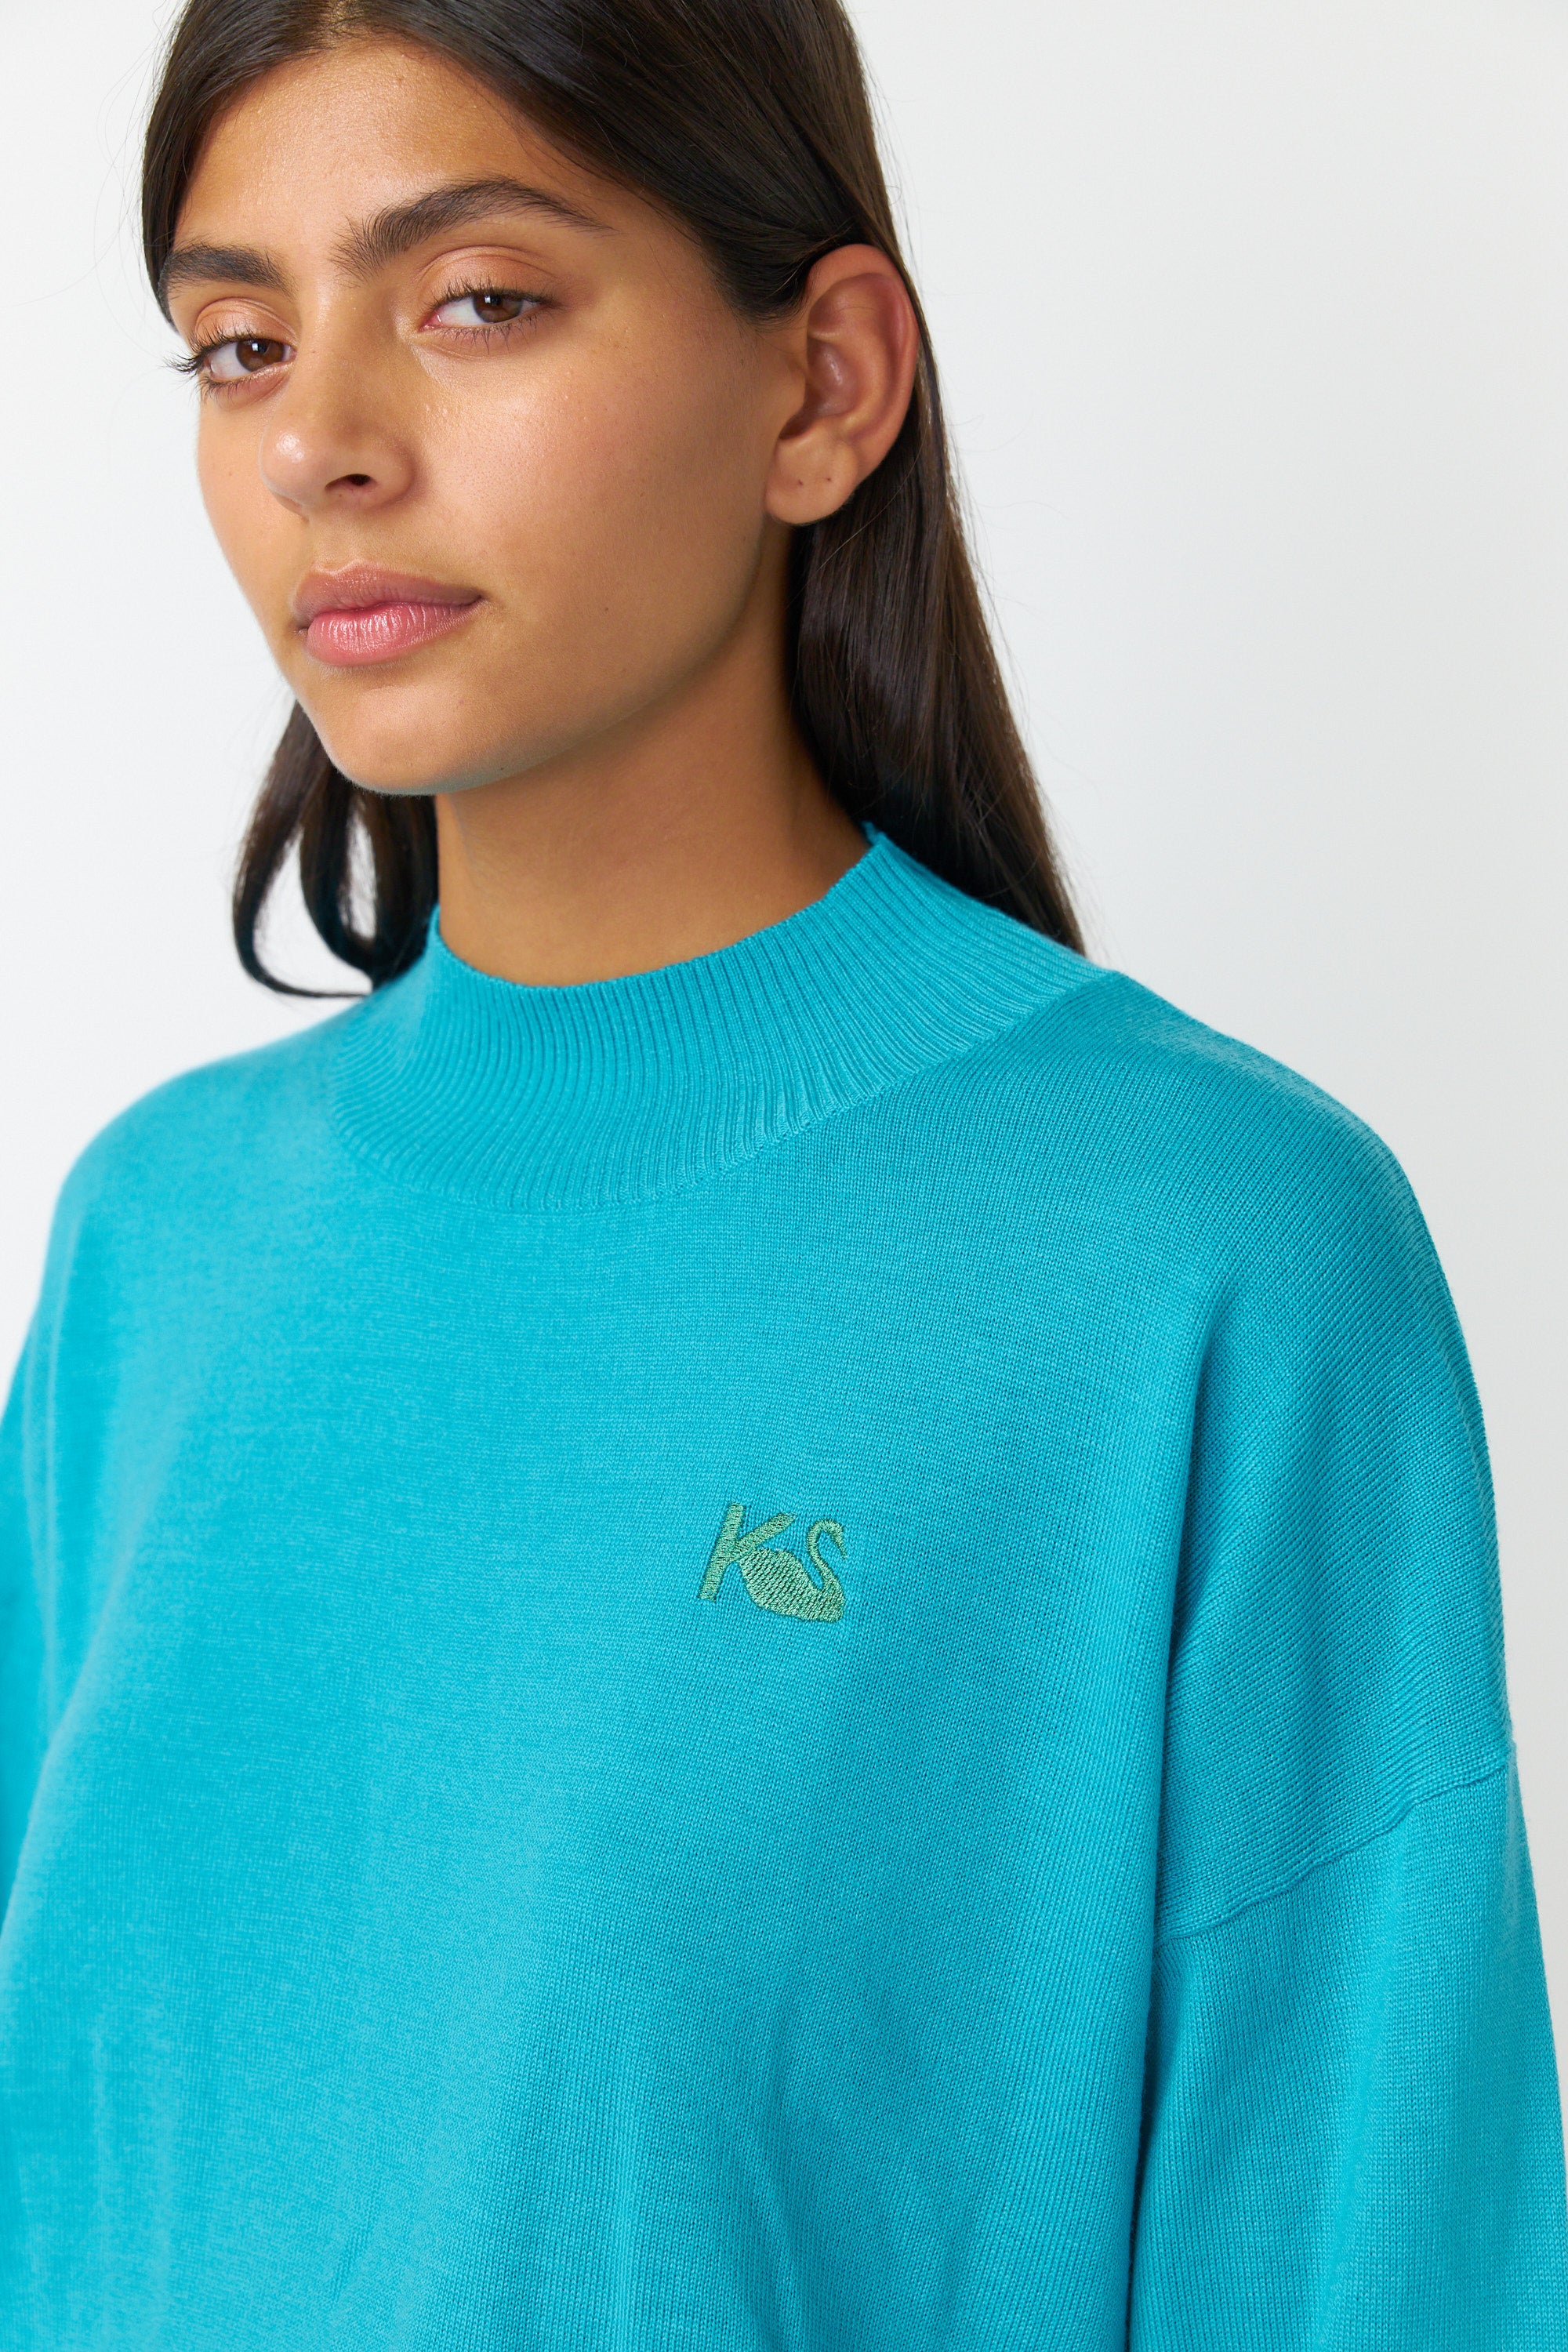 Kate Sylvester Teddy Jumper - Turquoise